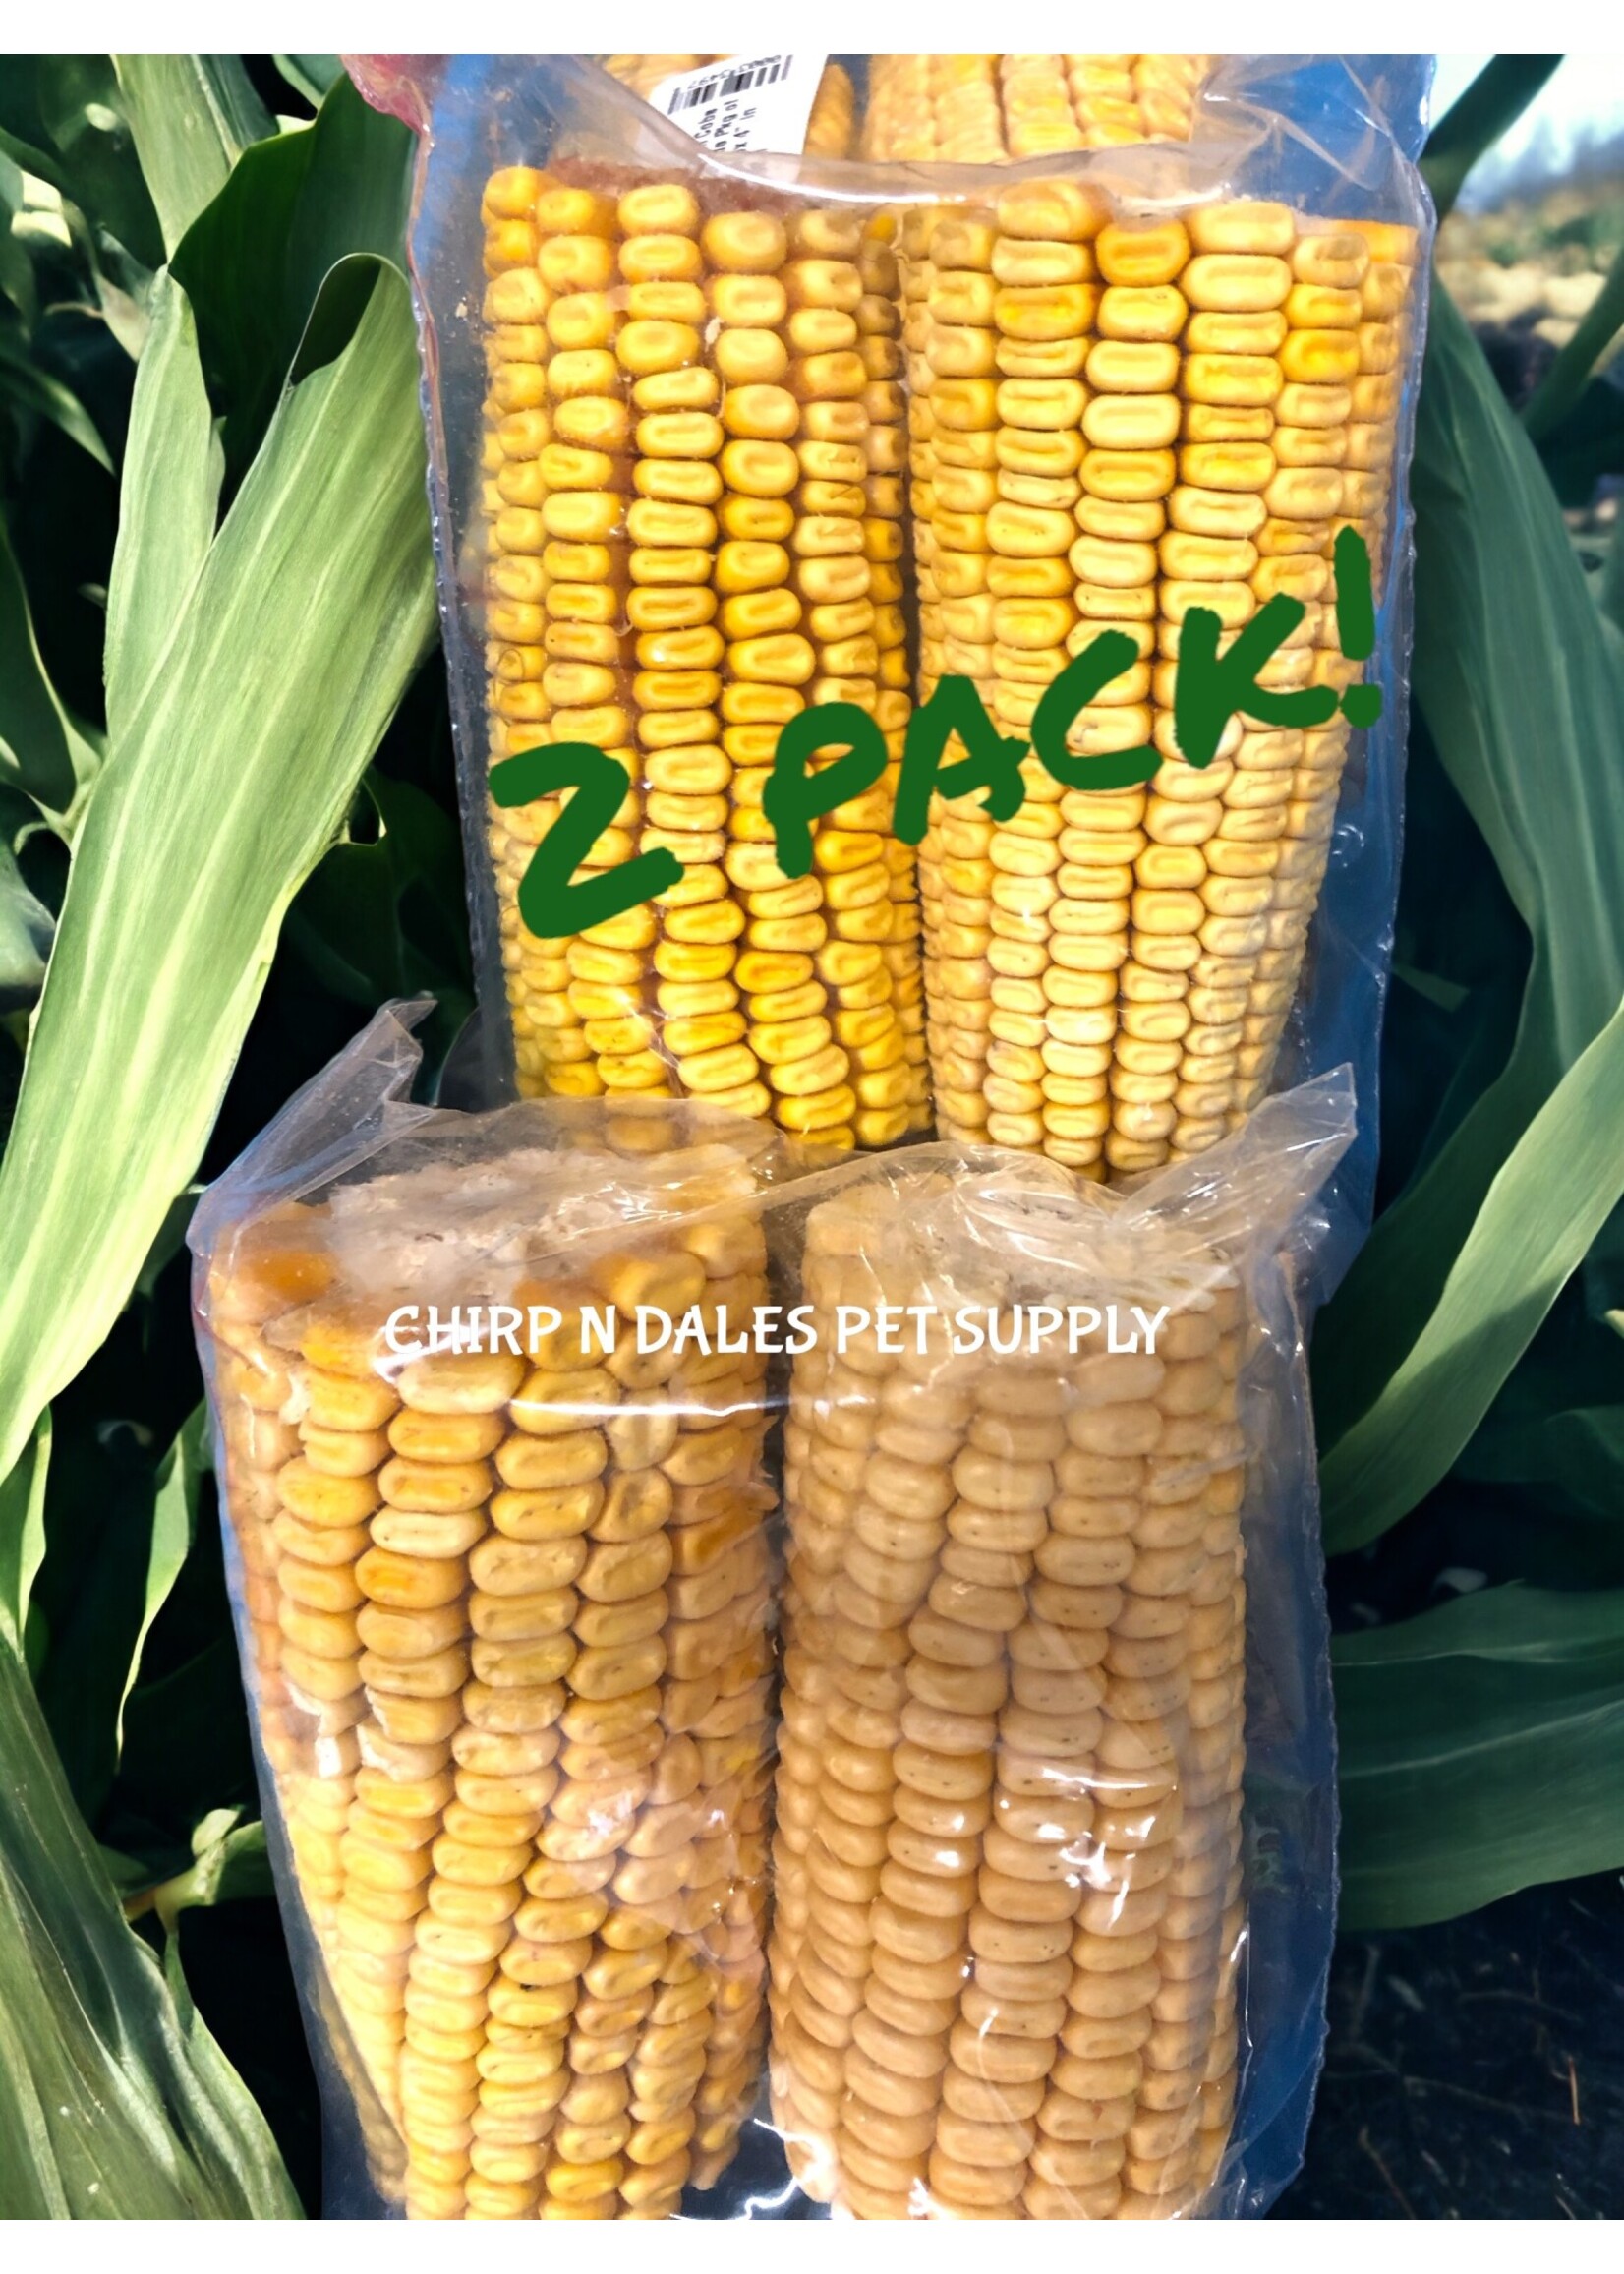 Anidis Dried Corn Cobs # 1 Grade Pkg of 2  Aprox 4" in length